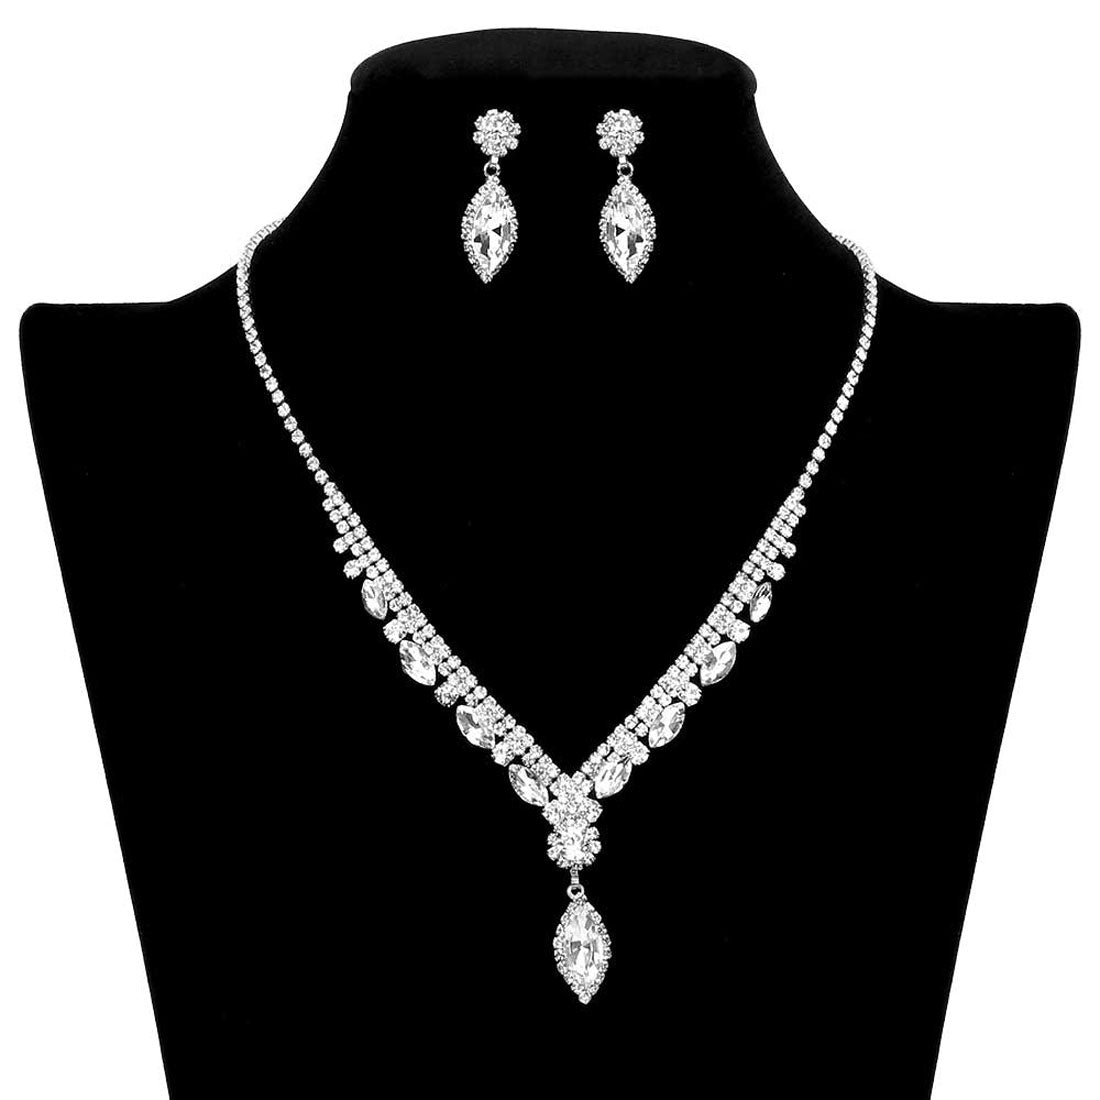 Silver Marquise Stone Accented Rhinestone Necklace. Get ready with these Rhinestone Necklace, put on a pop of color to complete your ensemble. Perfect for adding just the right amount of shimmer & shine and a touch of class to special events. Perfect Birthday Gift, Anniversary Gift, Mother's Day Gift, Graduation Gift, Valentine’s Day gift or any special occasion.